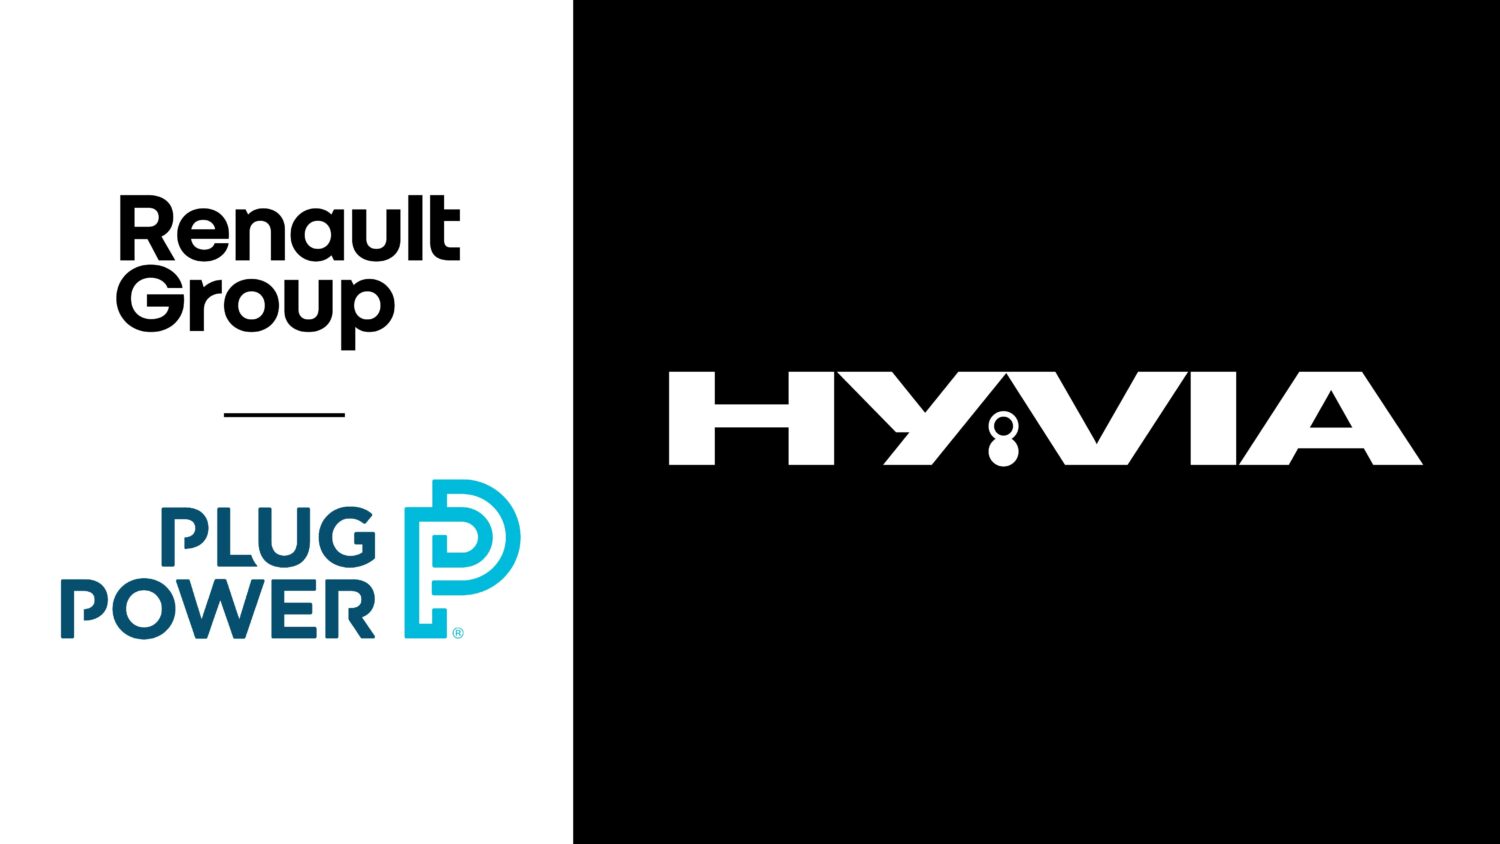 2021 - HYVIA: Renault Group and Plug Power’s joint venture